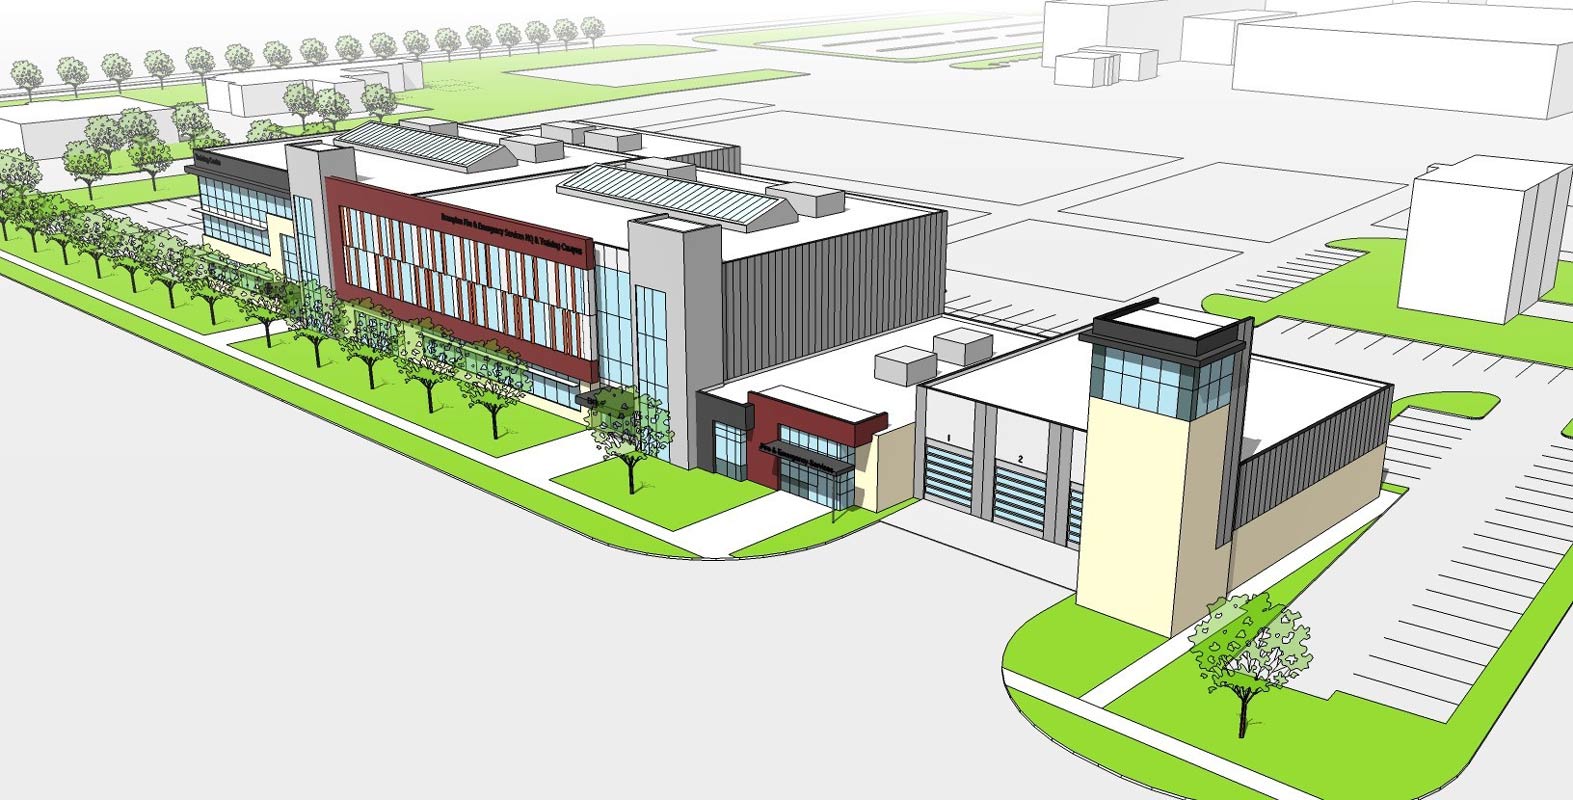 Brampton Fire Headquarters and Training Campus Feasibility Study